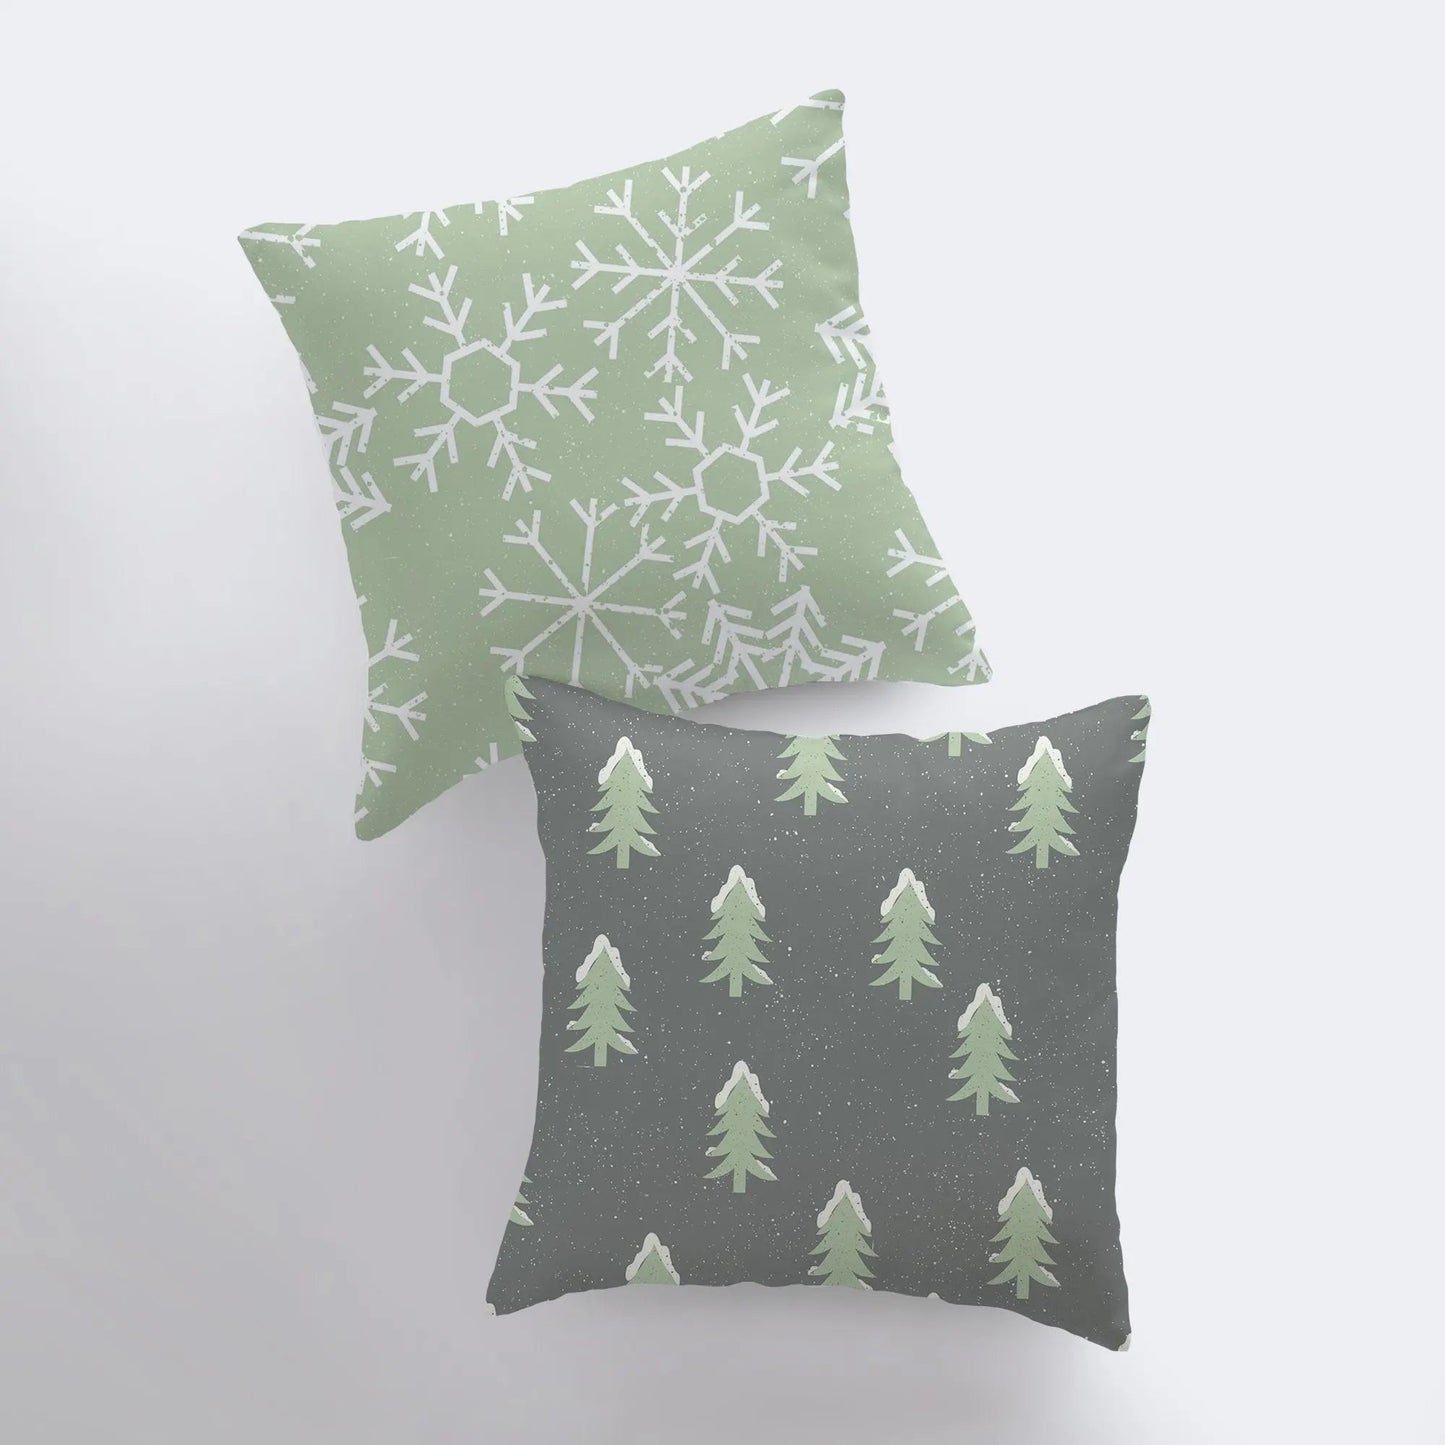 Christmas Trees | Throw Pillow | Pillow Cover | Snow Flakes | Trees | Home Decor | Winter Décor | Christmas tree | Christmas Gifts by UniikPillows